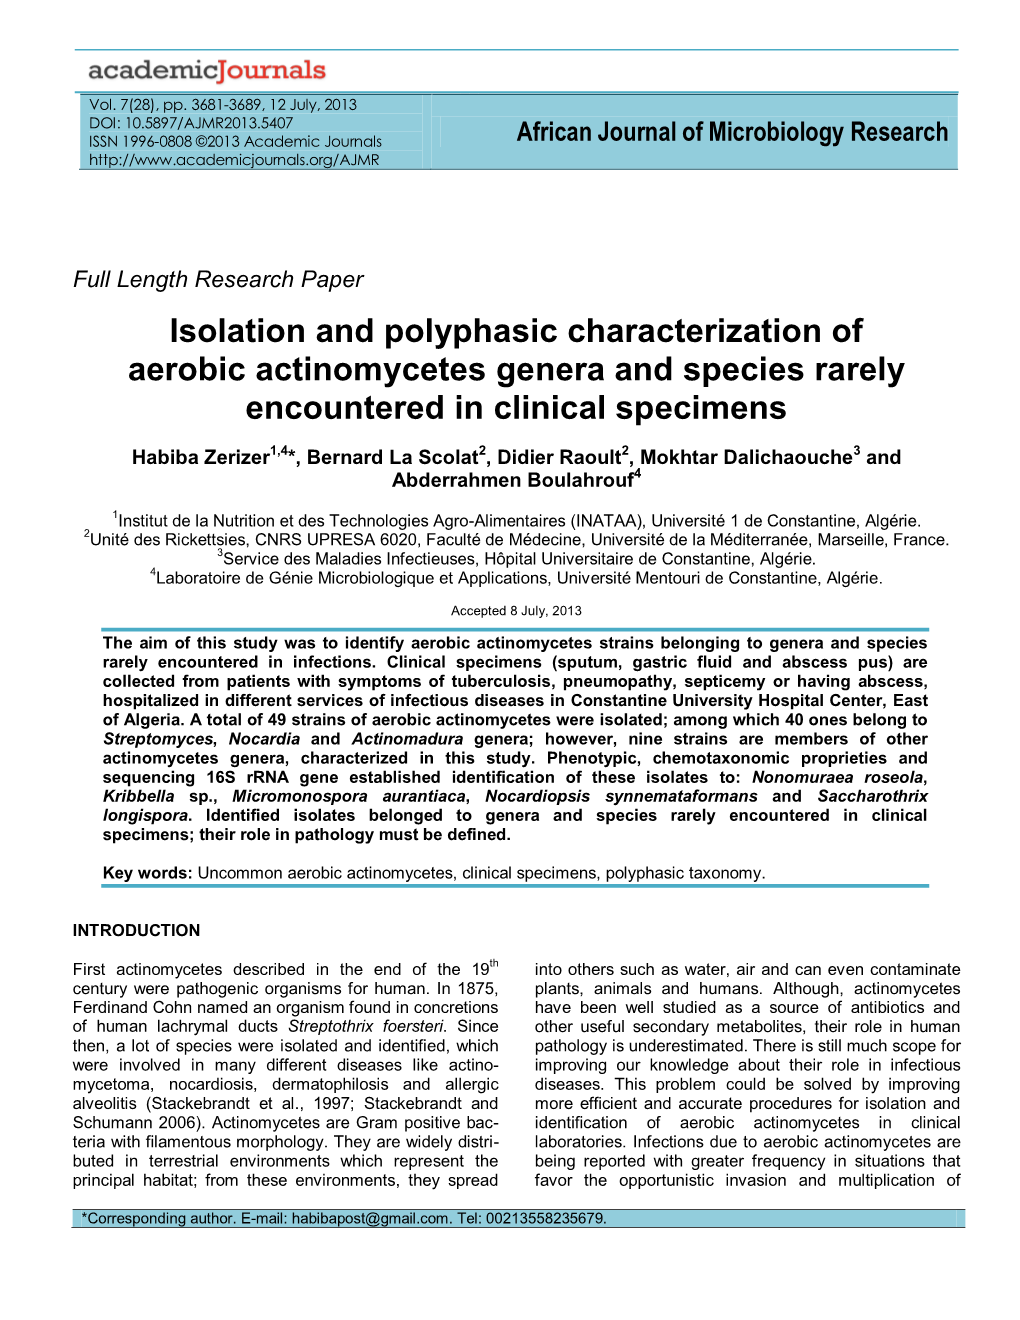 Isolation and Polyphasic Characterization of Aerobic Actinomycetes Genera and Species Rarely Encountered in Clinical Specimens